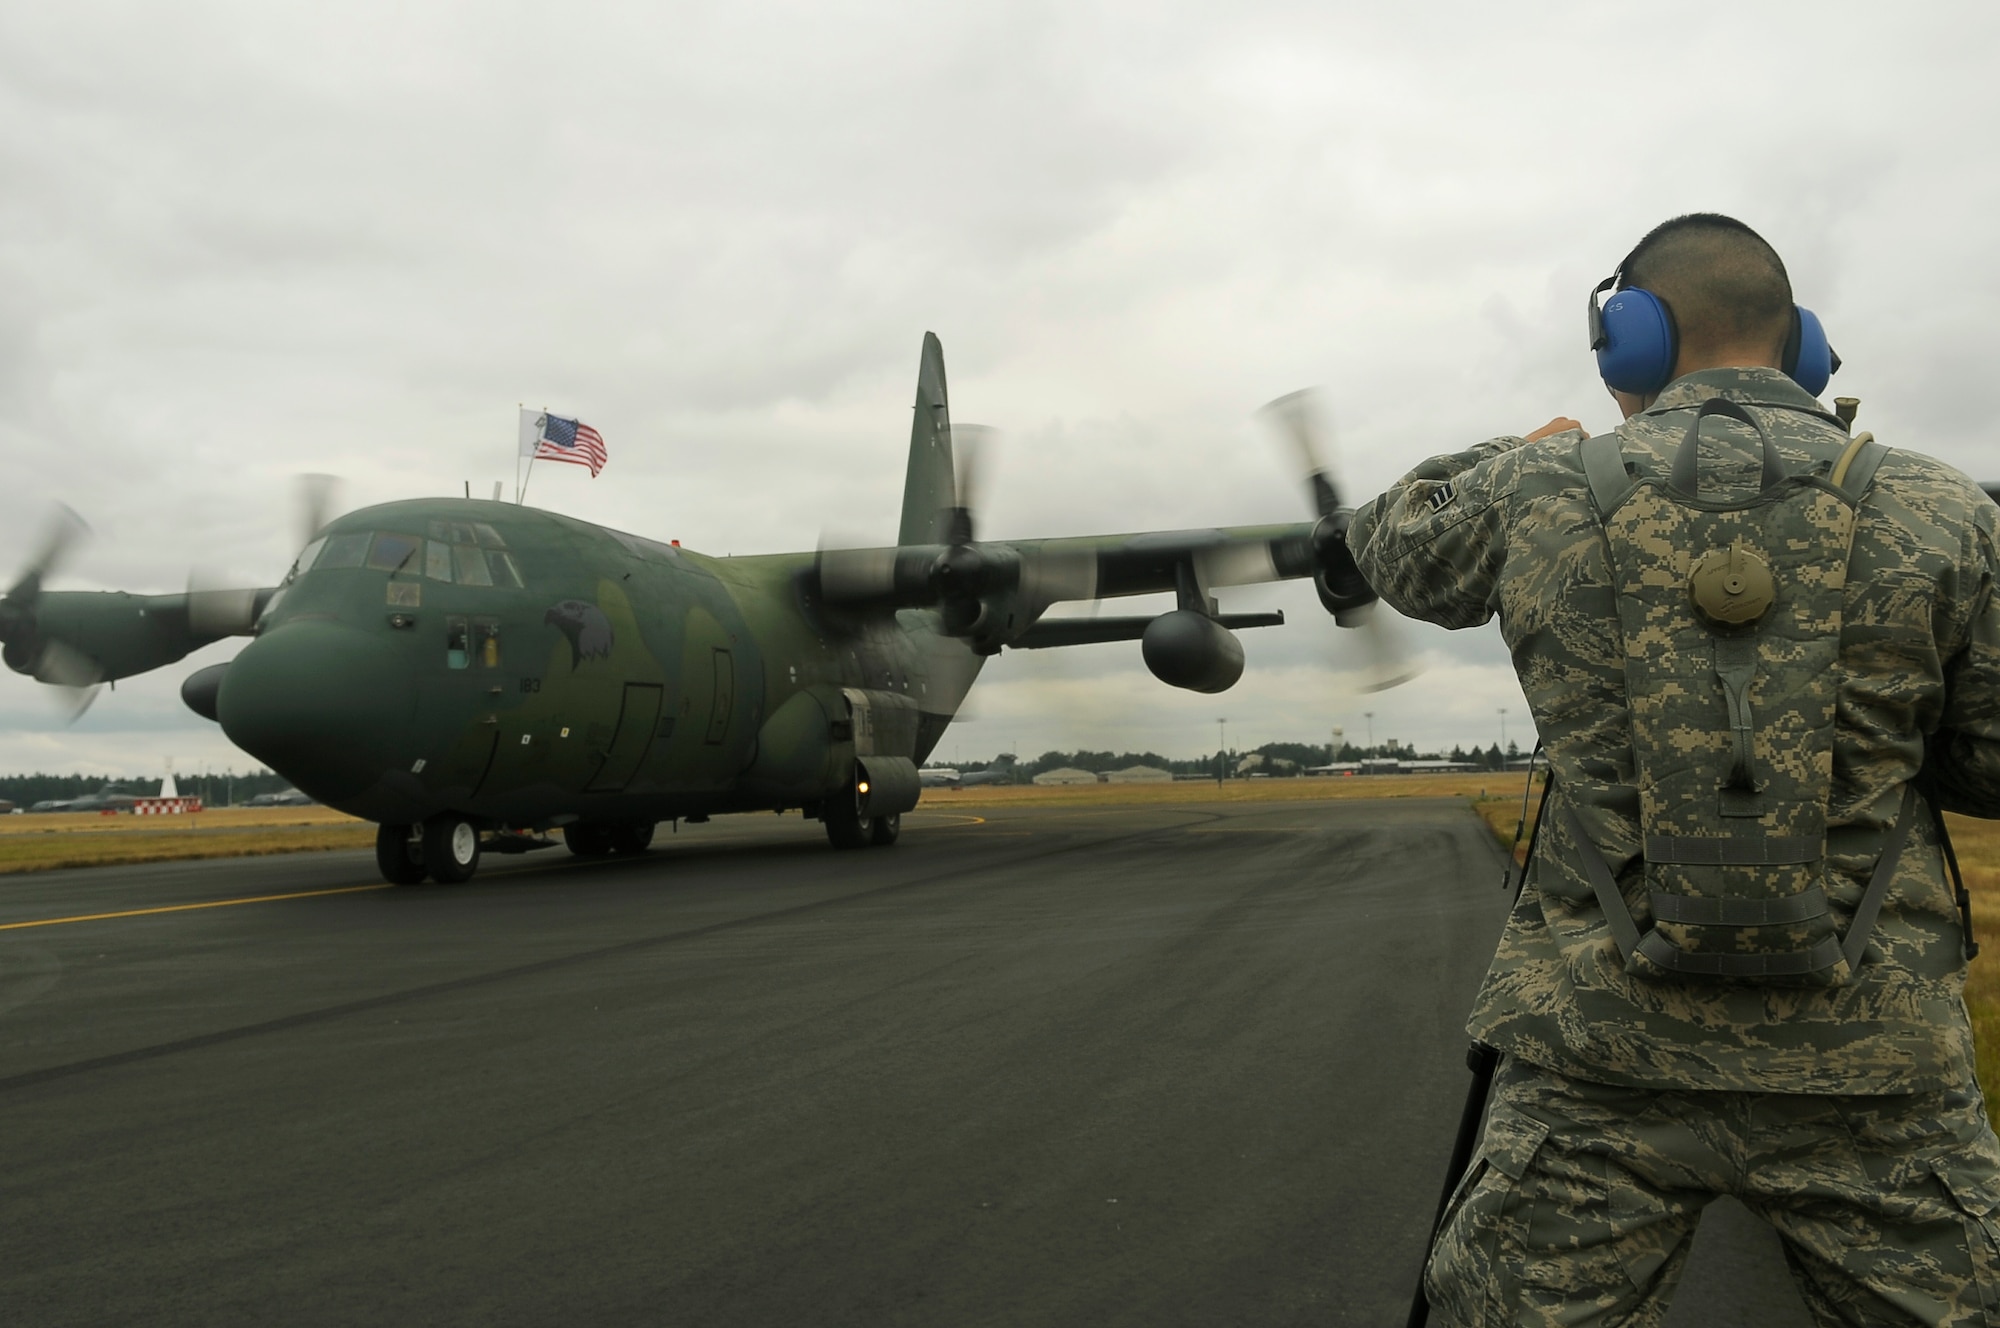 Senior Airman Jonathan Garcia, 4th Combat Camera, documents the arrival of a Republic of Korea C-130 aircraft at McChord July 13, 2009. The plane and its crew have come to compete in Air Mobility Command's Rodeo 2009, an international competition that focuses on improving worldwide air mobility forces' professional core abilities. (U.S. Air Force photo/Senior Airman Dayton Mitchell) 